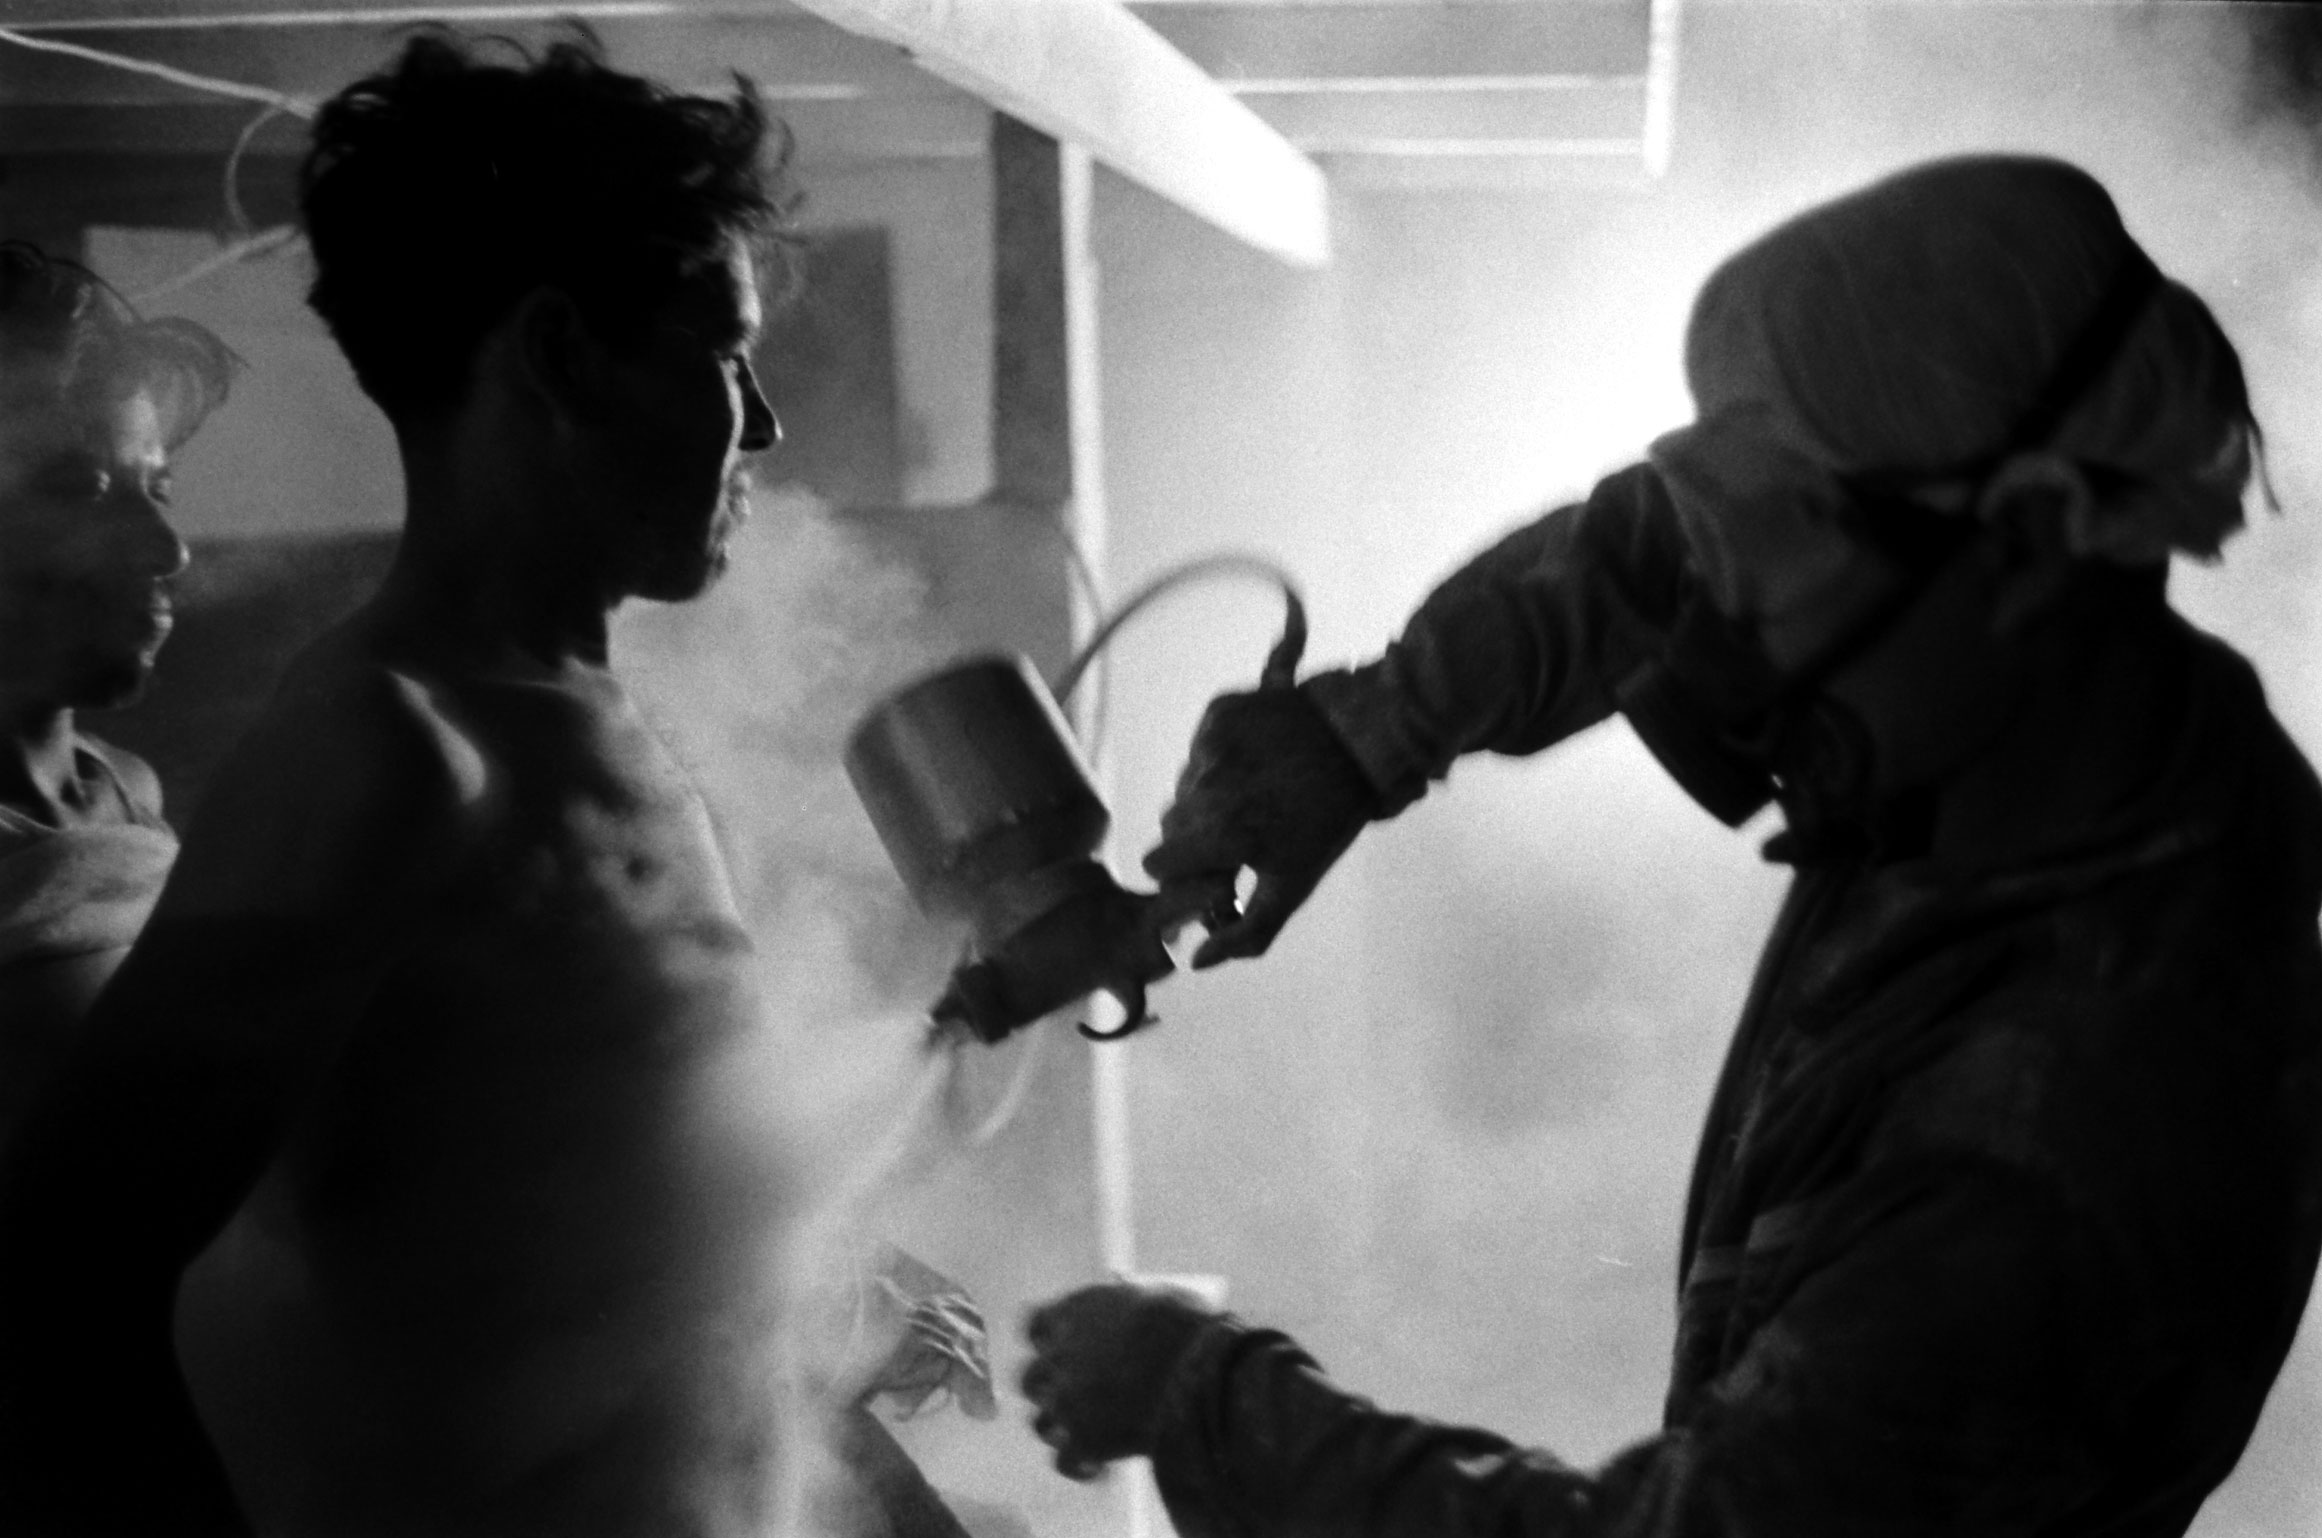 Migrant farm workers sprayed with unidentified chemical after day's work, USA, 1959.